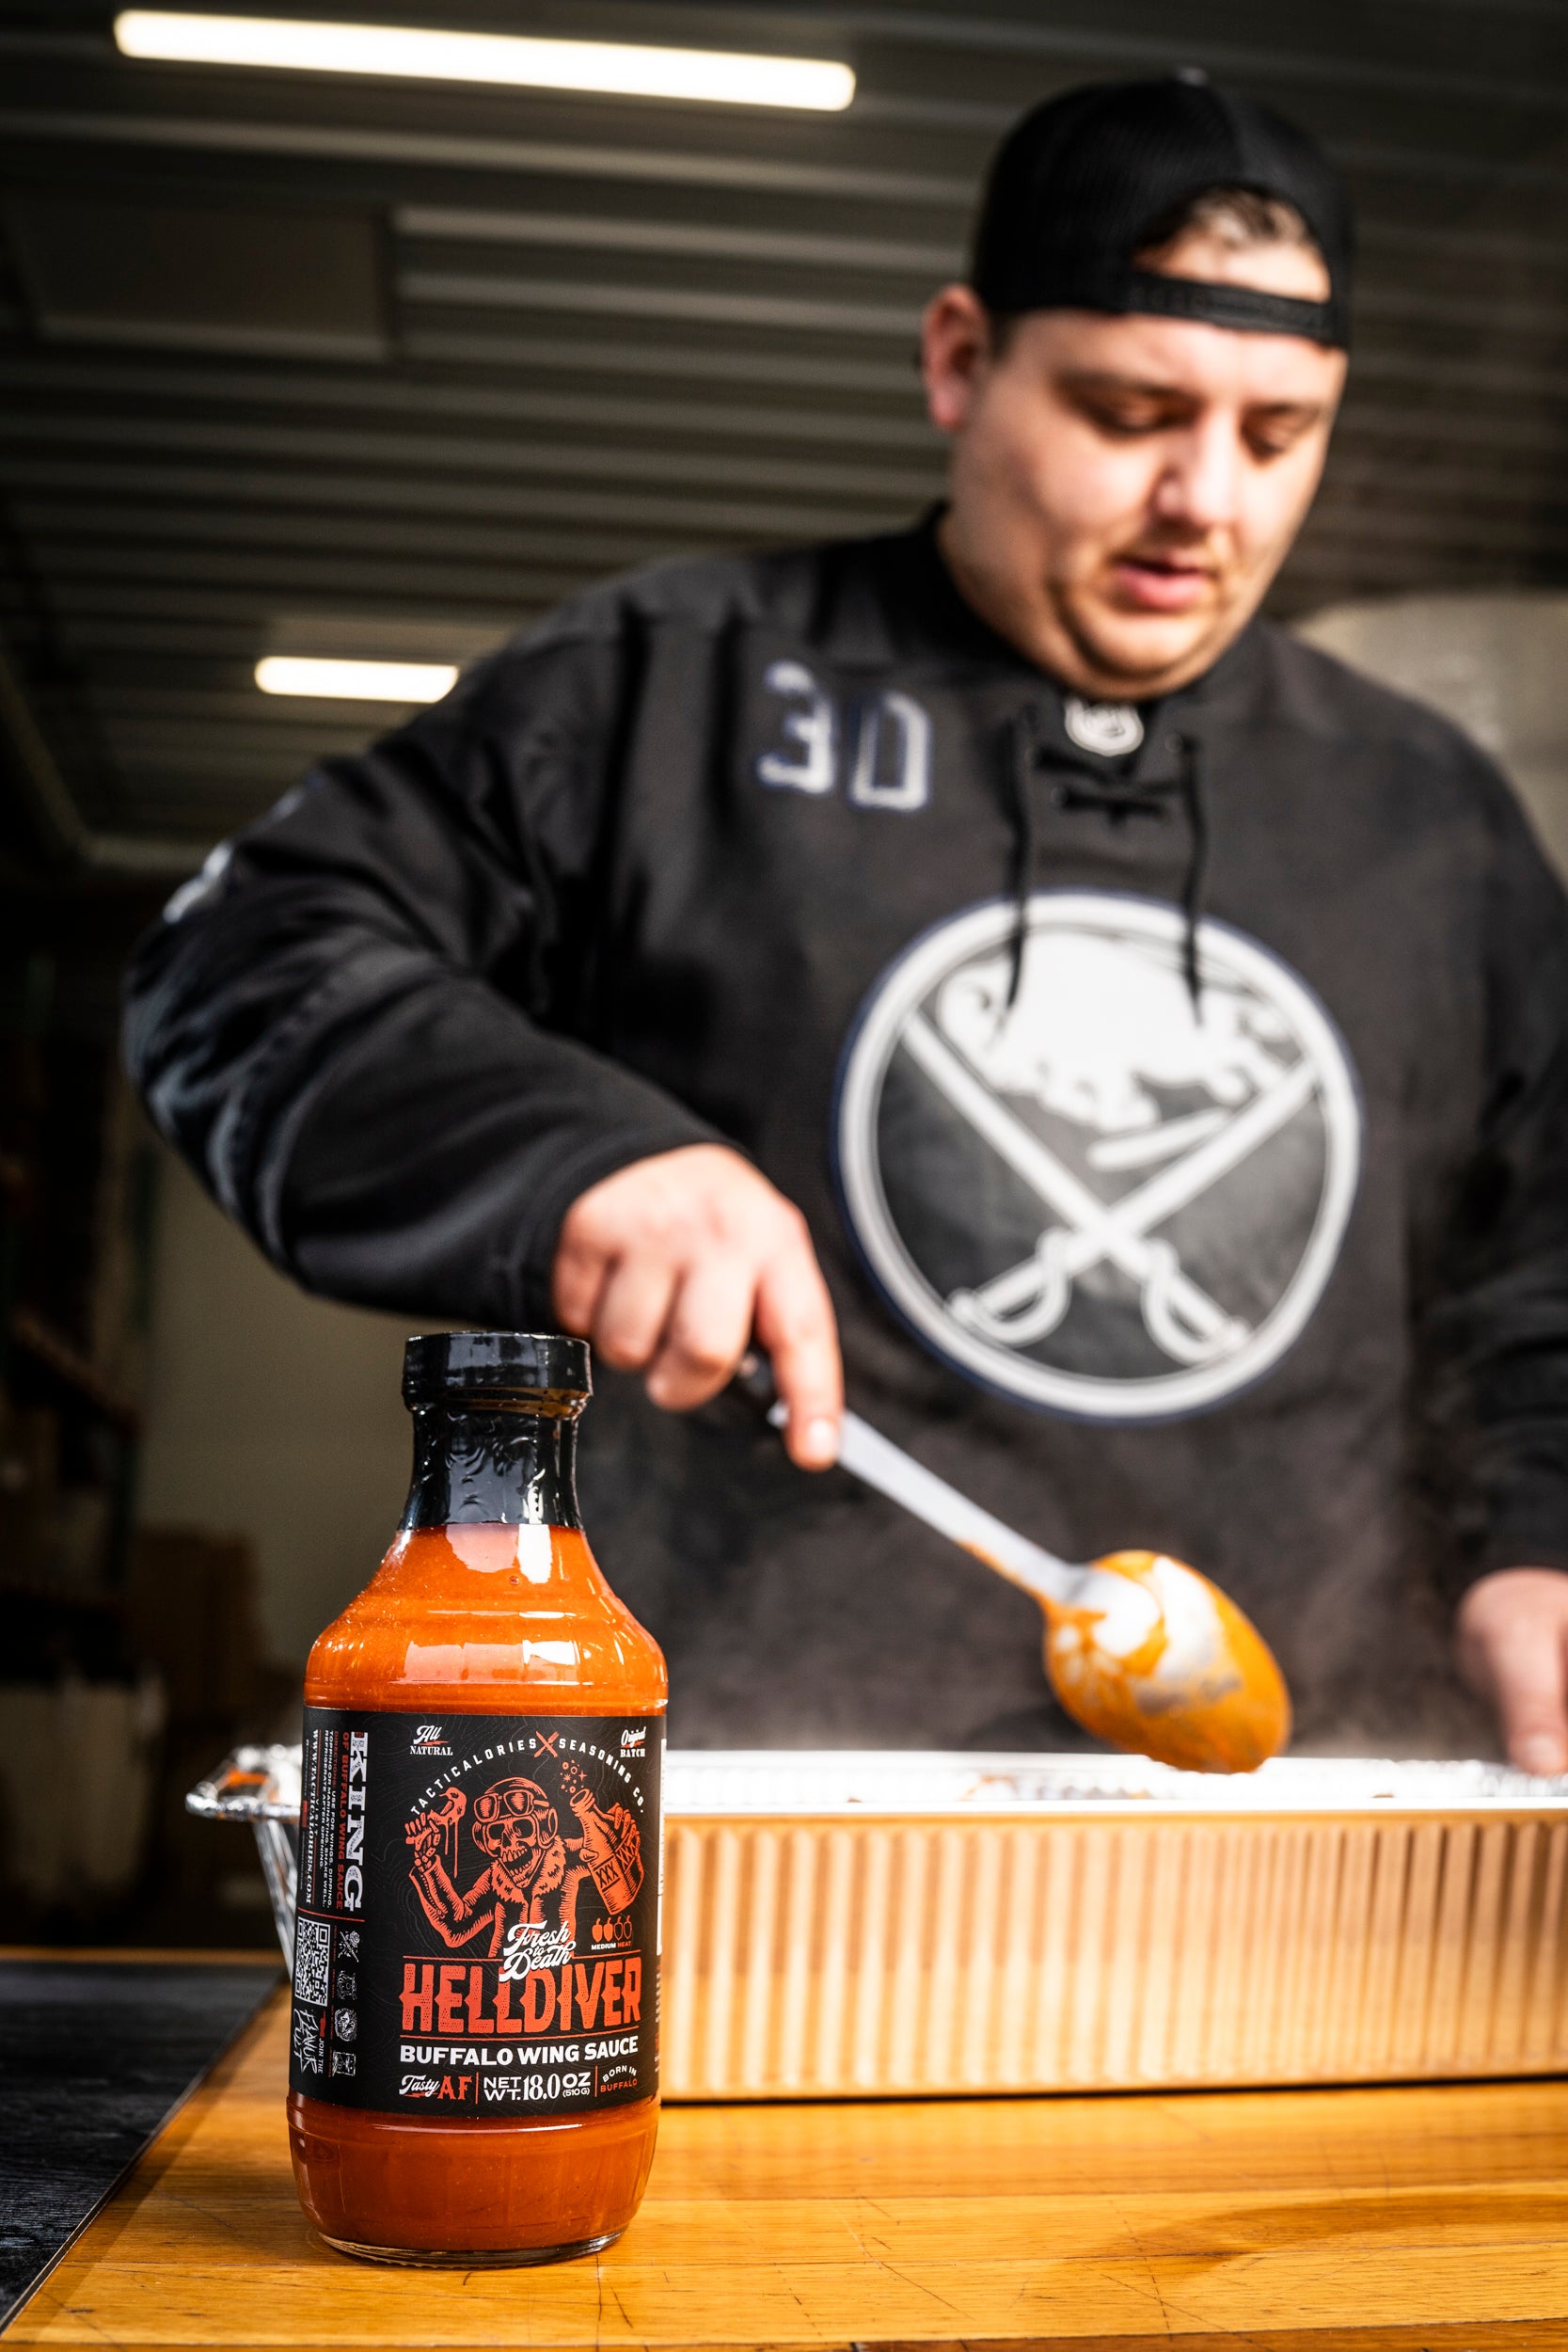 BORN IN BUFFALO: Snow, broken tables, and the best damn sauce in the game.